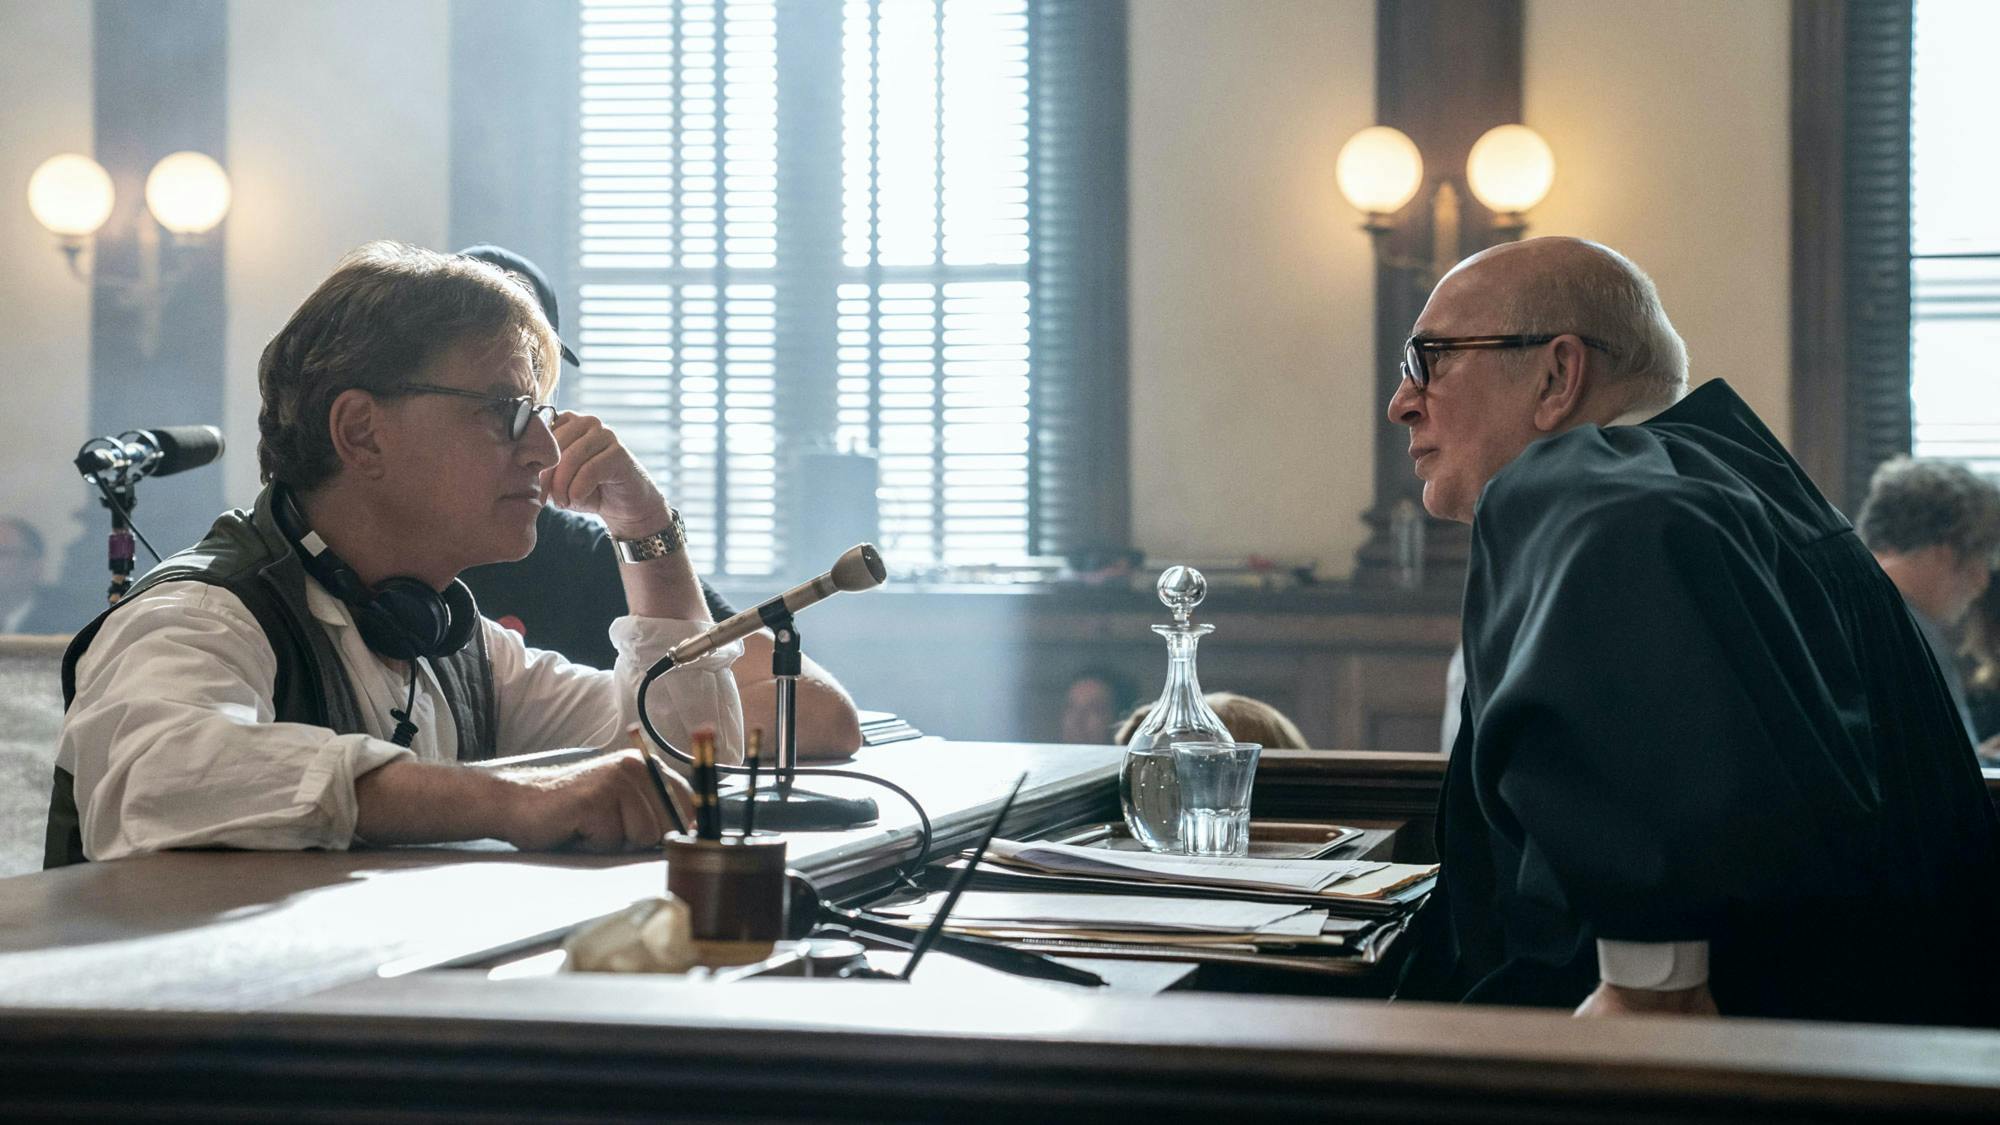 On the courtroom set, Sorkin has approached the bench to speak with Frank Langella, in costume as Judge Julius Hoffman. 